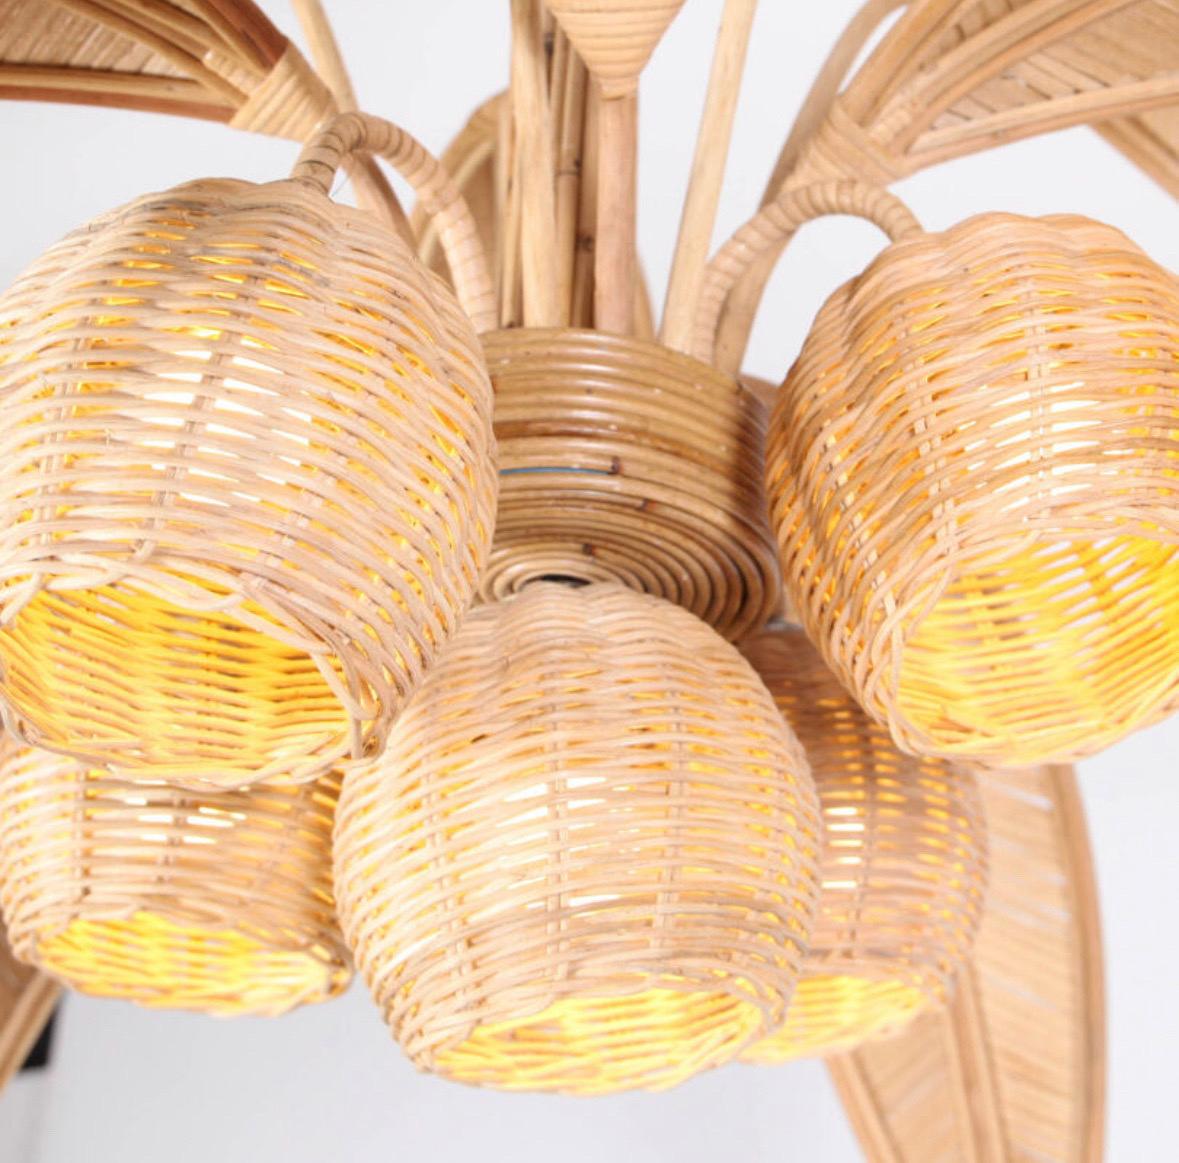 Large rattan « coconut tree/ palm tree » ceiling light with 5 lights in the coconuts and 10 adjustable palms that come off for the shipping. Very decorative, this chandelier is unique and will bring a sunny touch to your room. Very high quality of